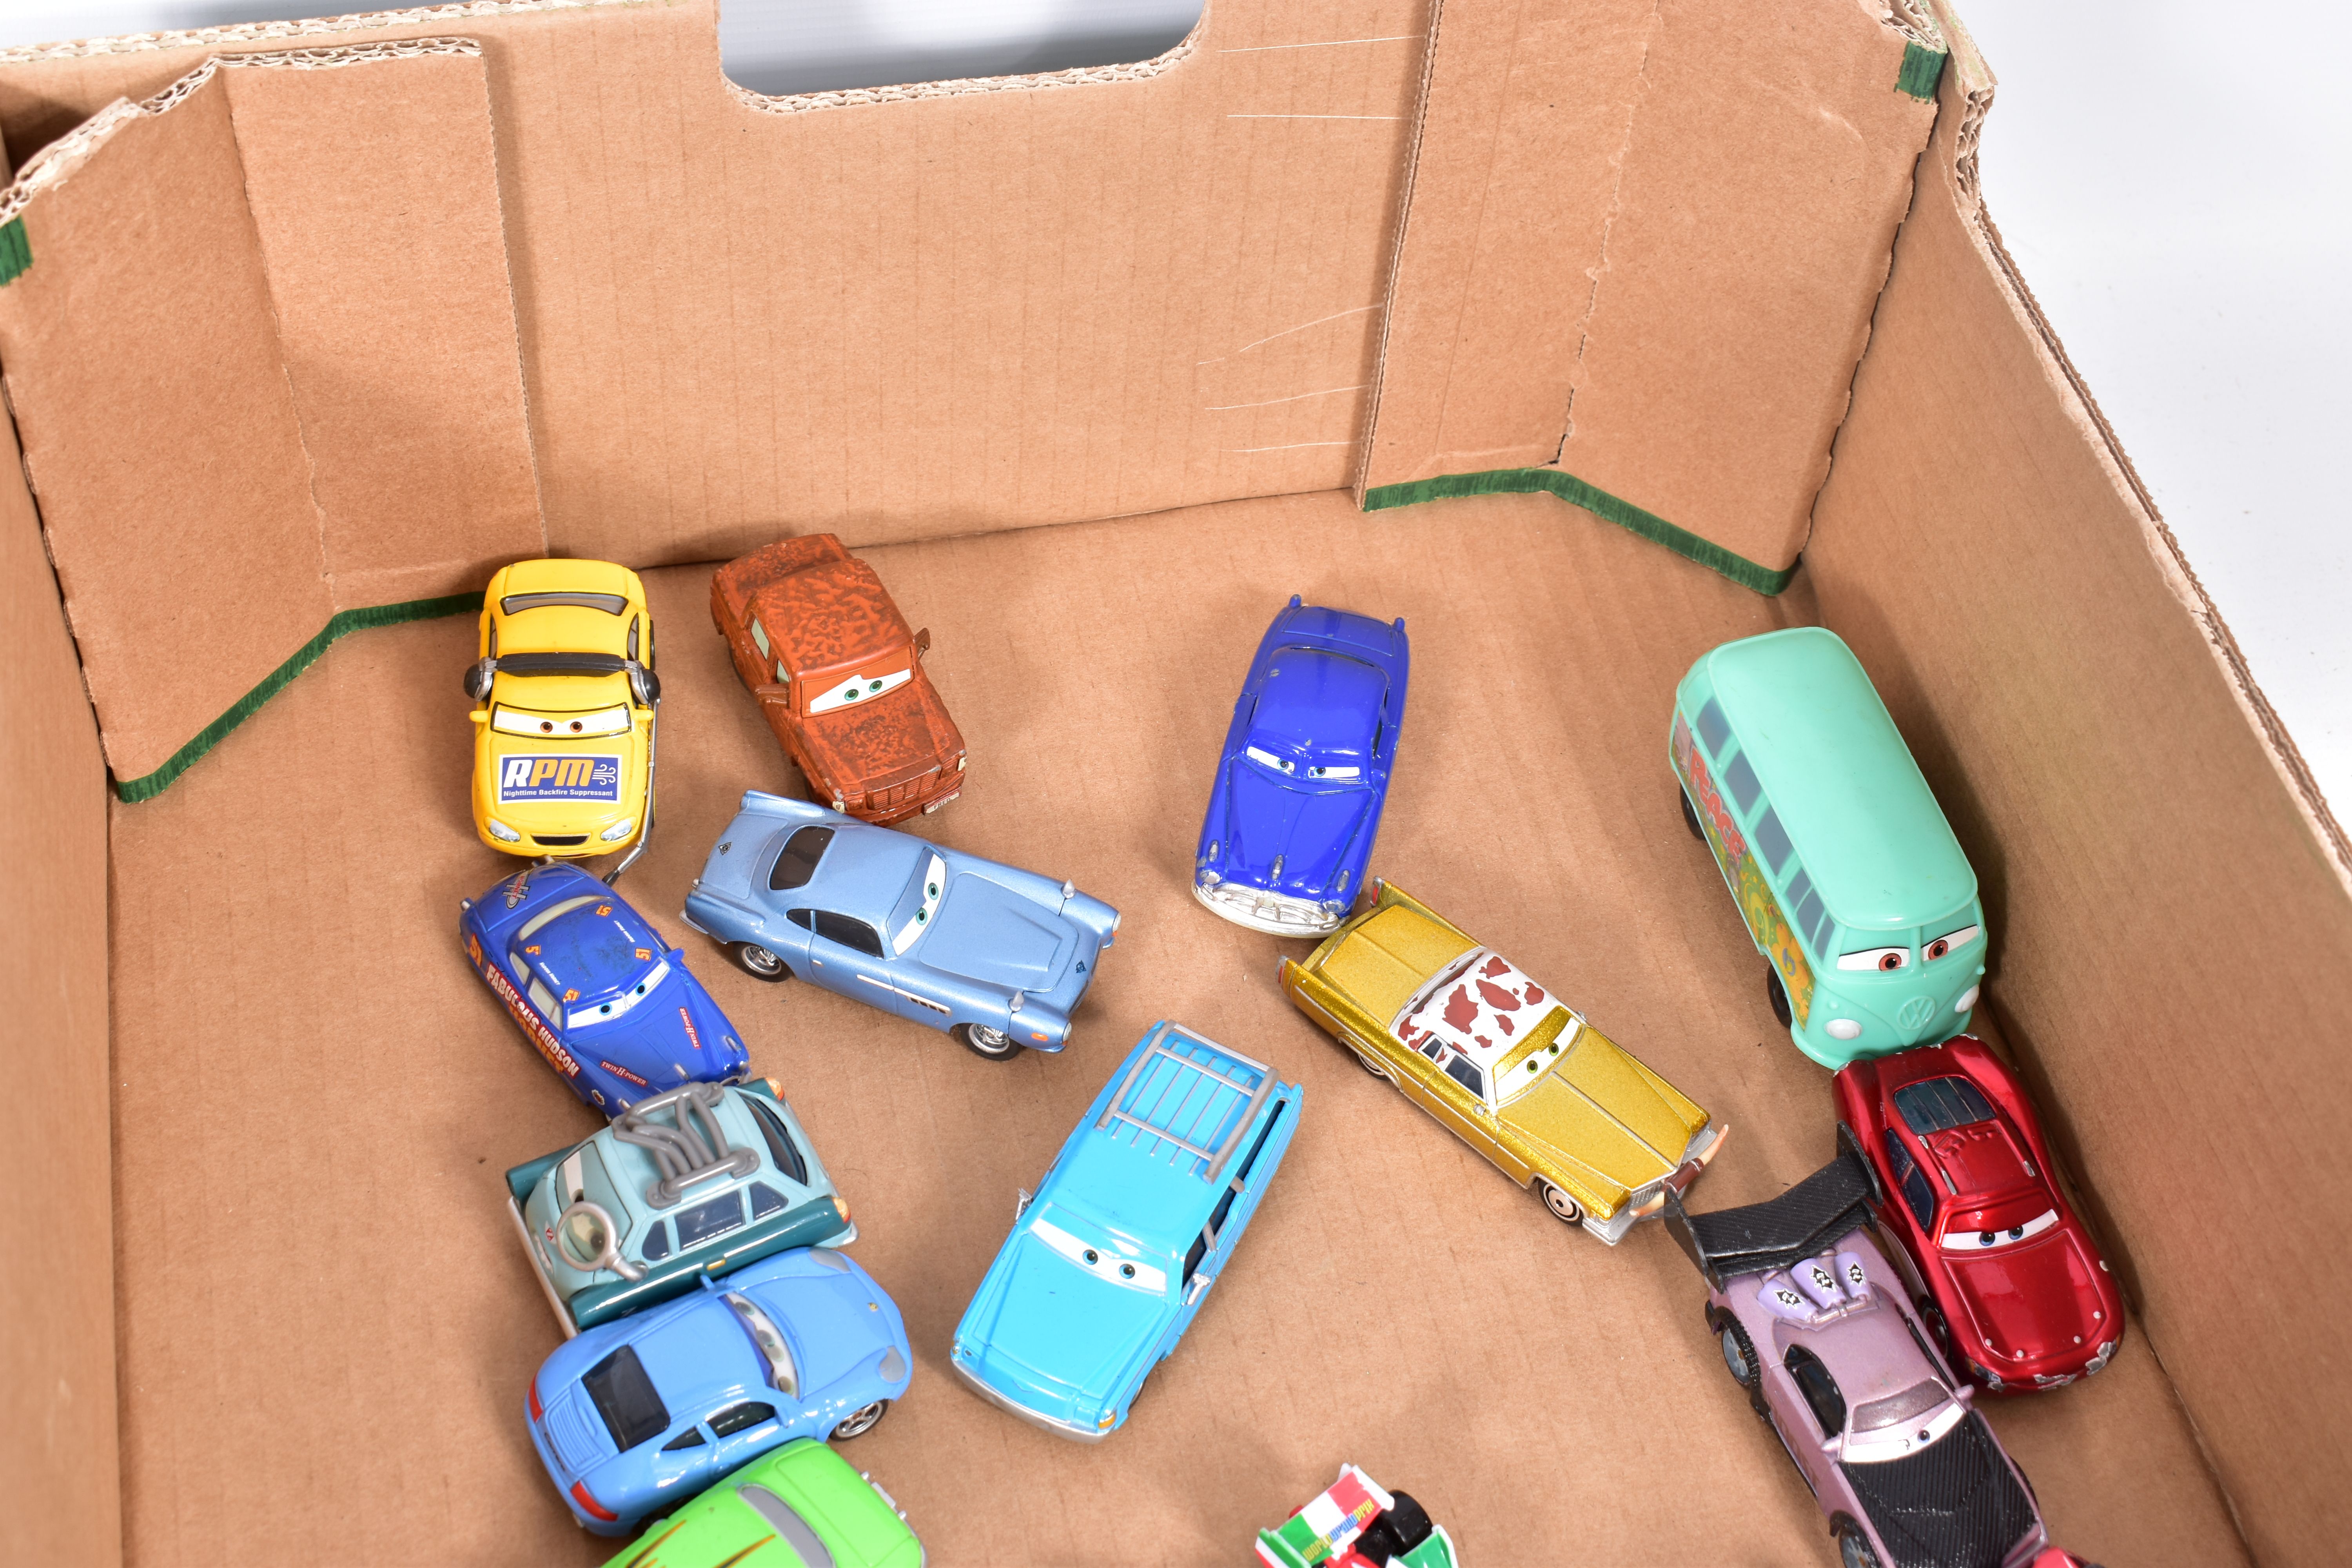 A COLLECTION OF PLASTIC MODELS FROM THE DISNEY PIXAR FILM CARS, assorted models, scales and - Image 7 of 7